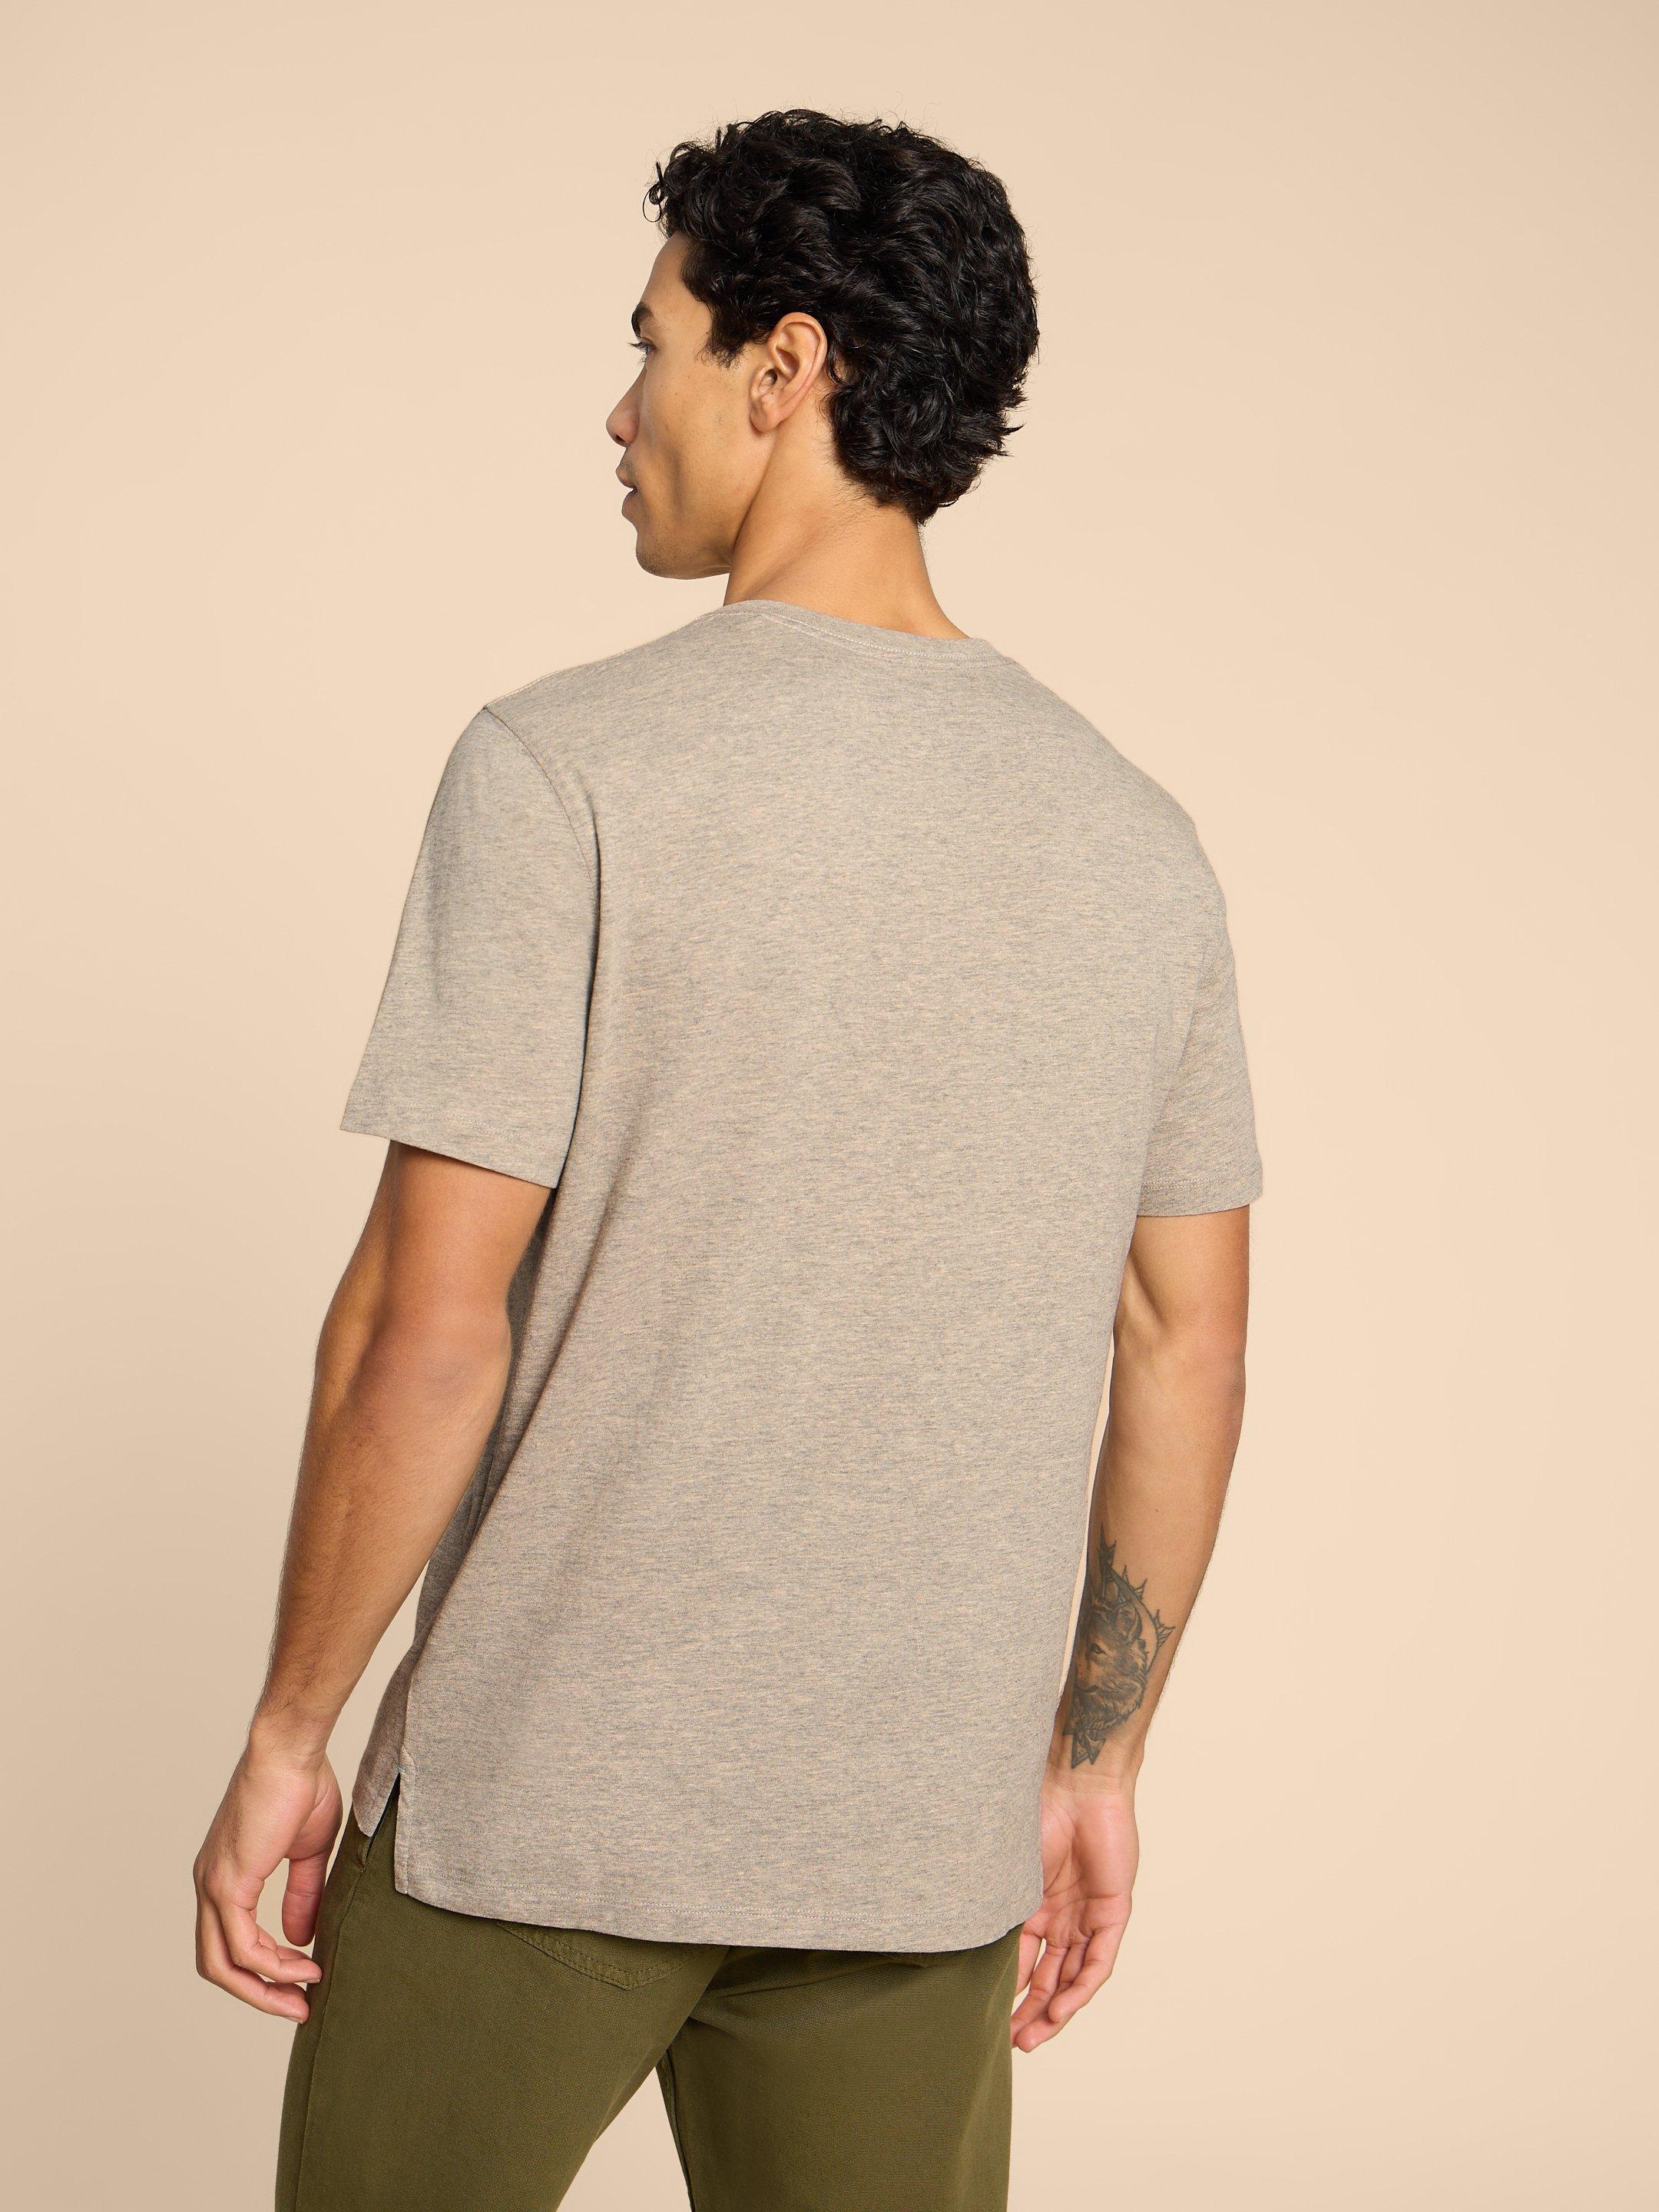 Scaling Waves Graphic Tee in GREY PR - MODEL BACK